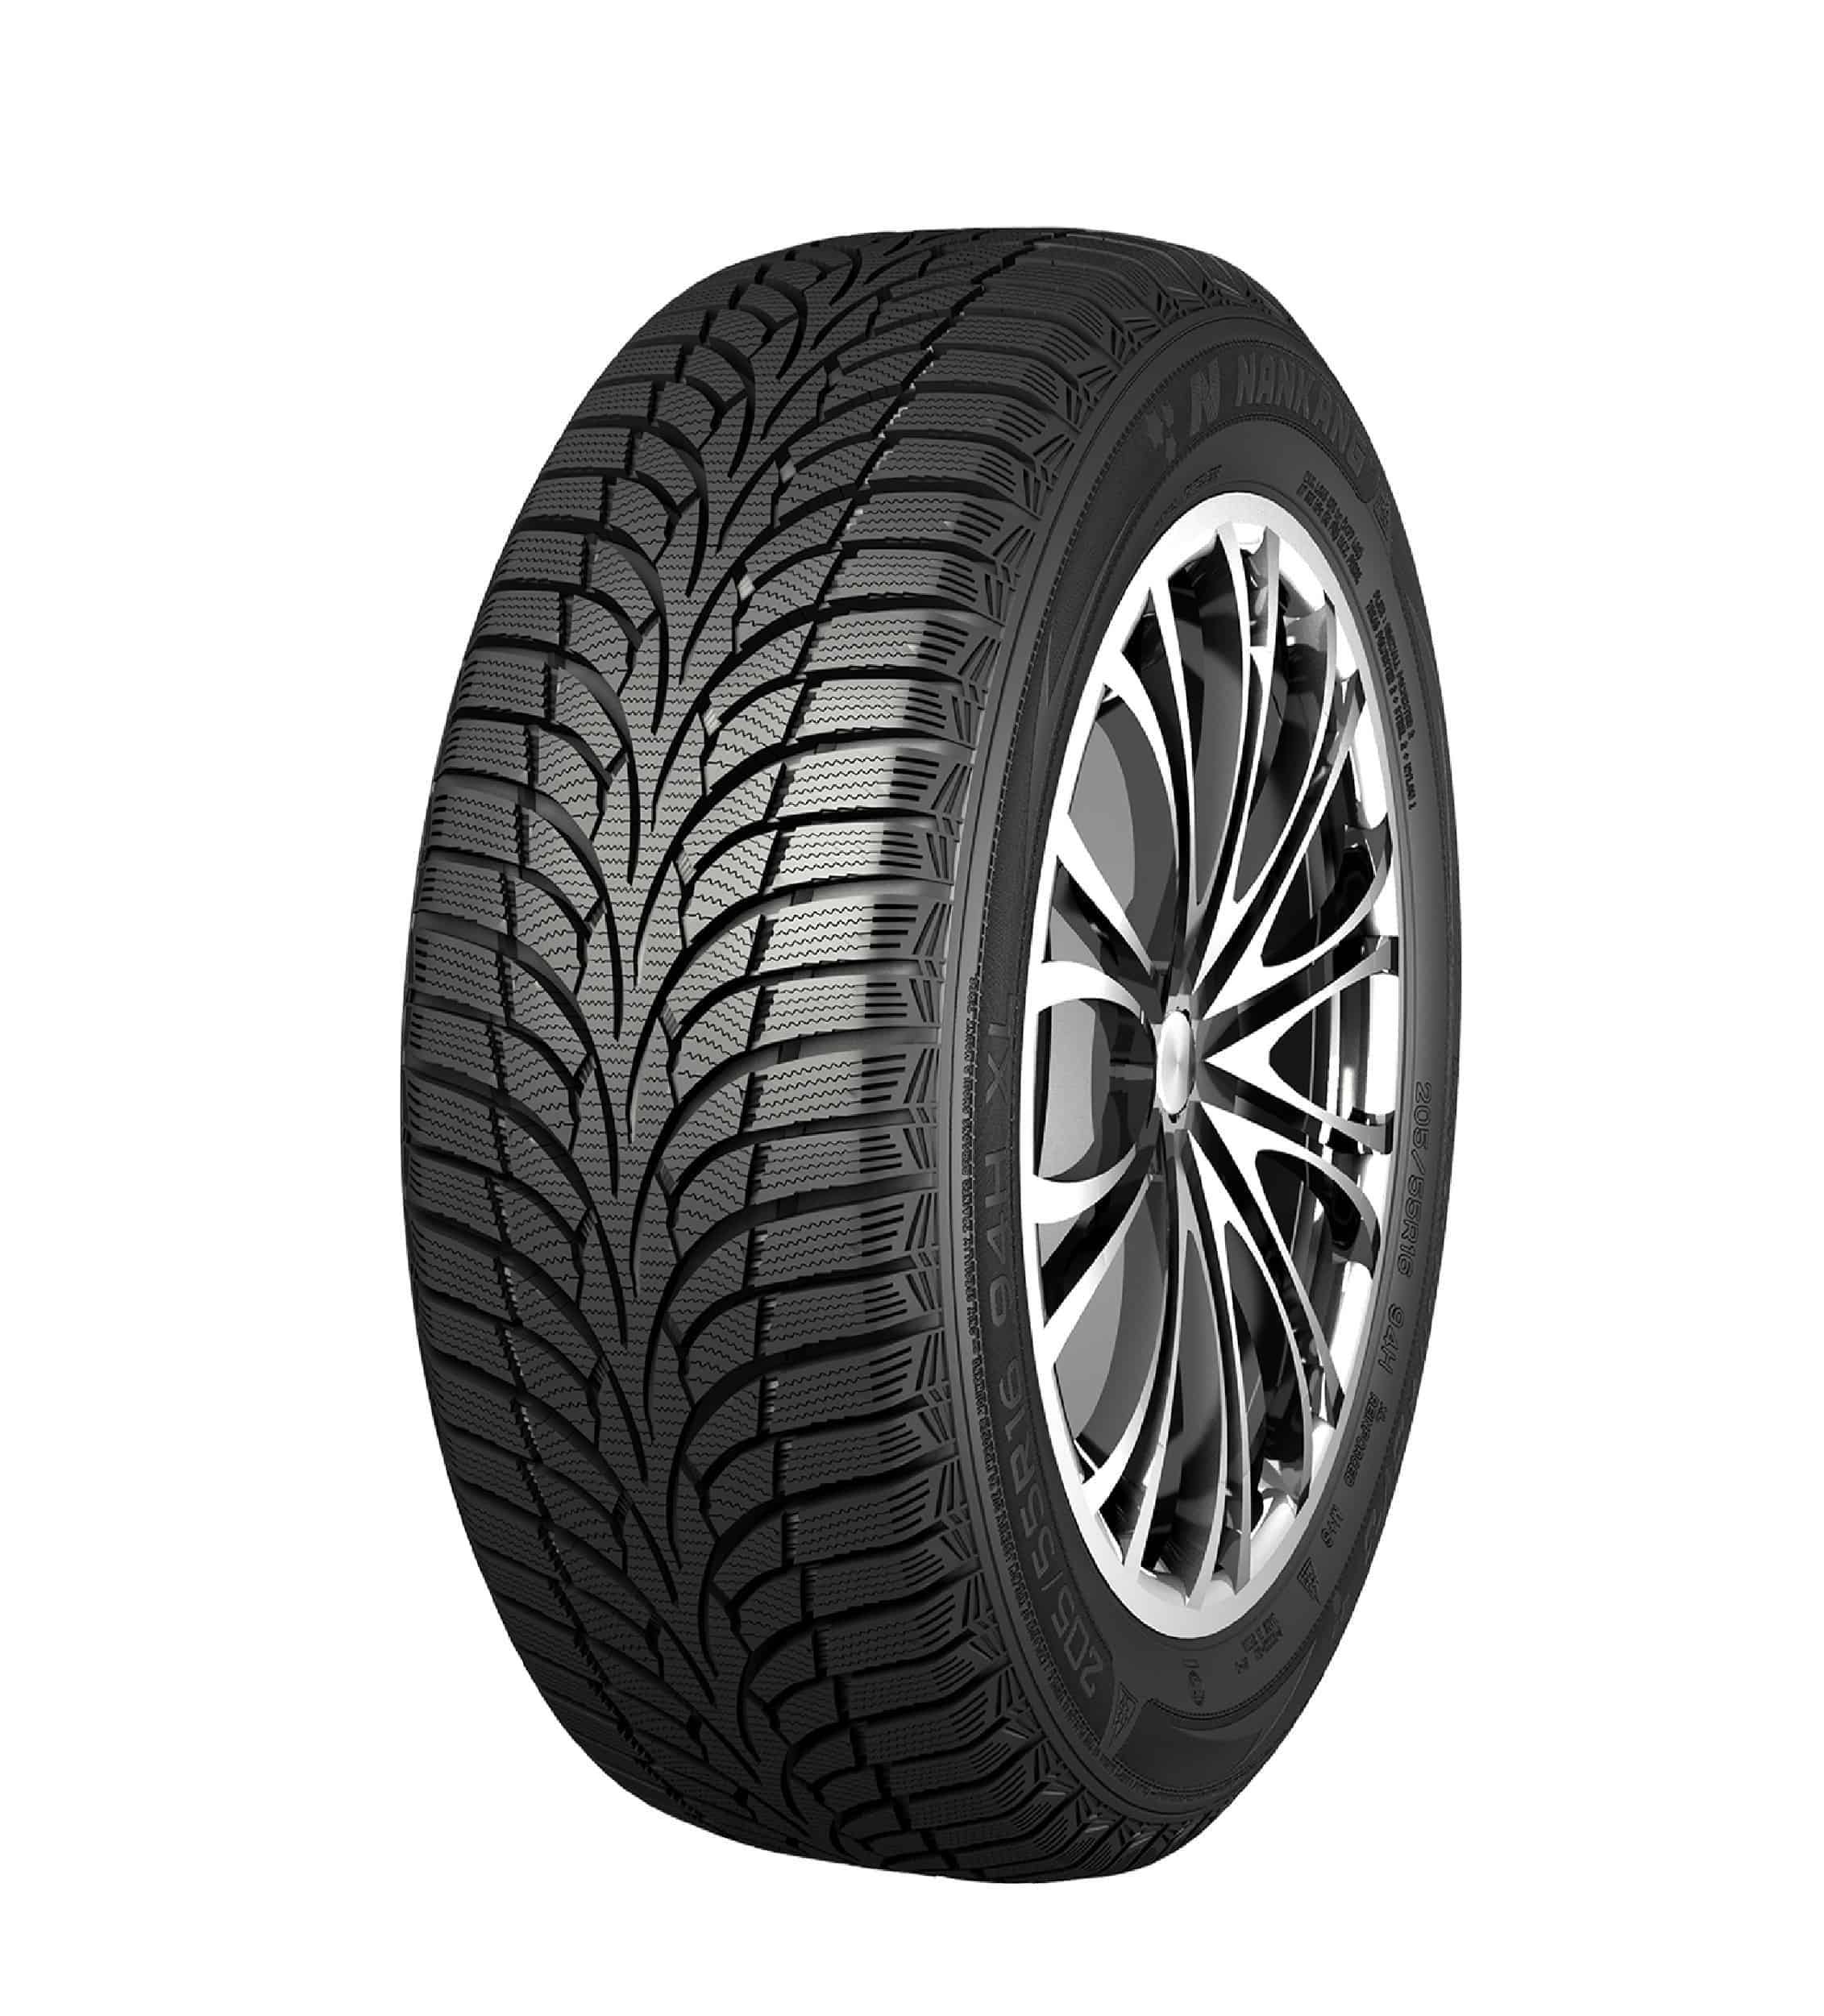 Gomme Nuove Nankang 195/50 R16 88H Winter Activa SV-3 XL M+S pneumatici nuovi Invernale